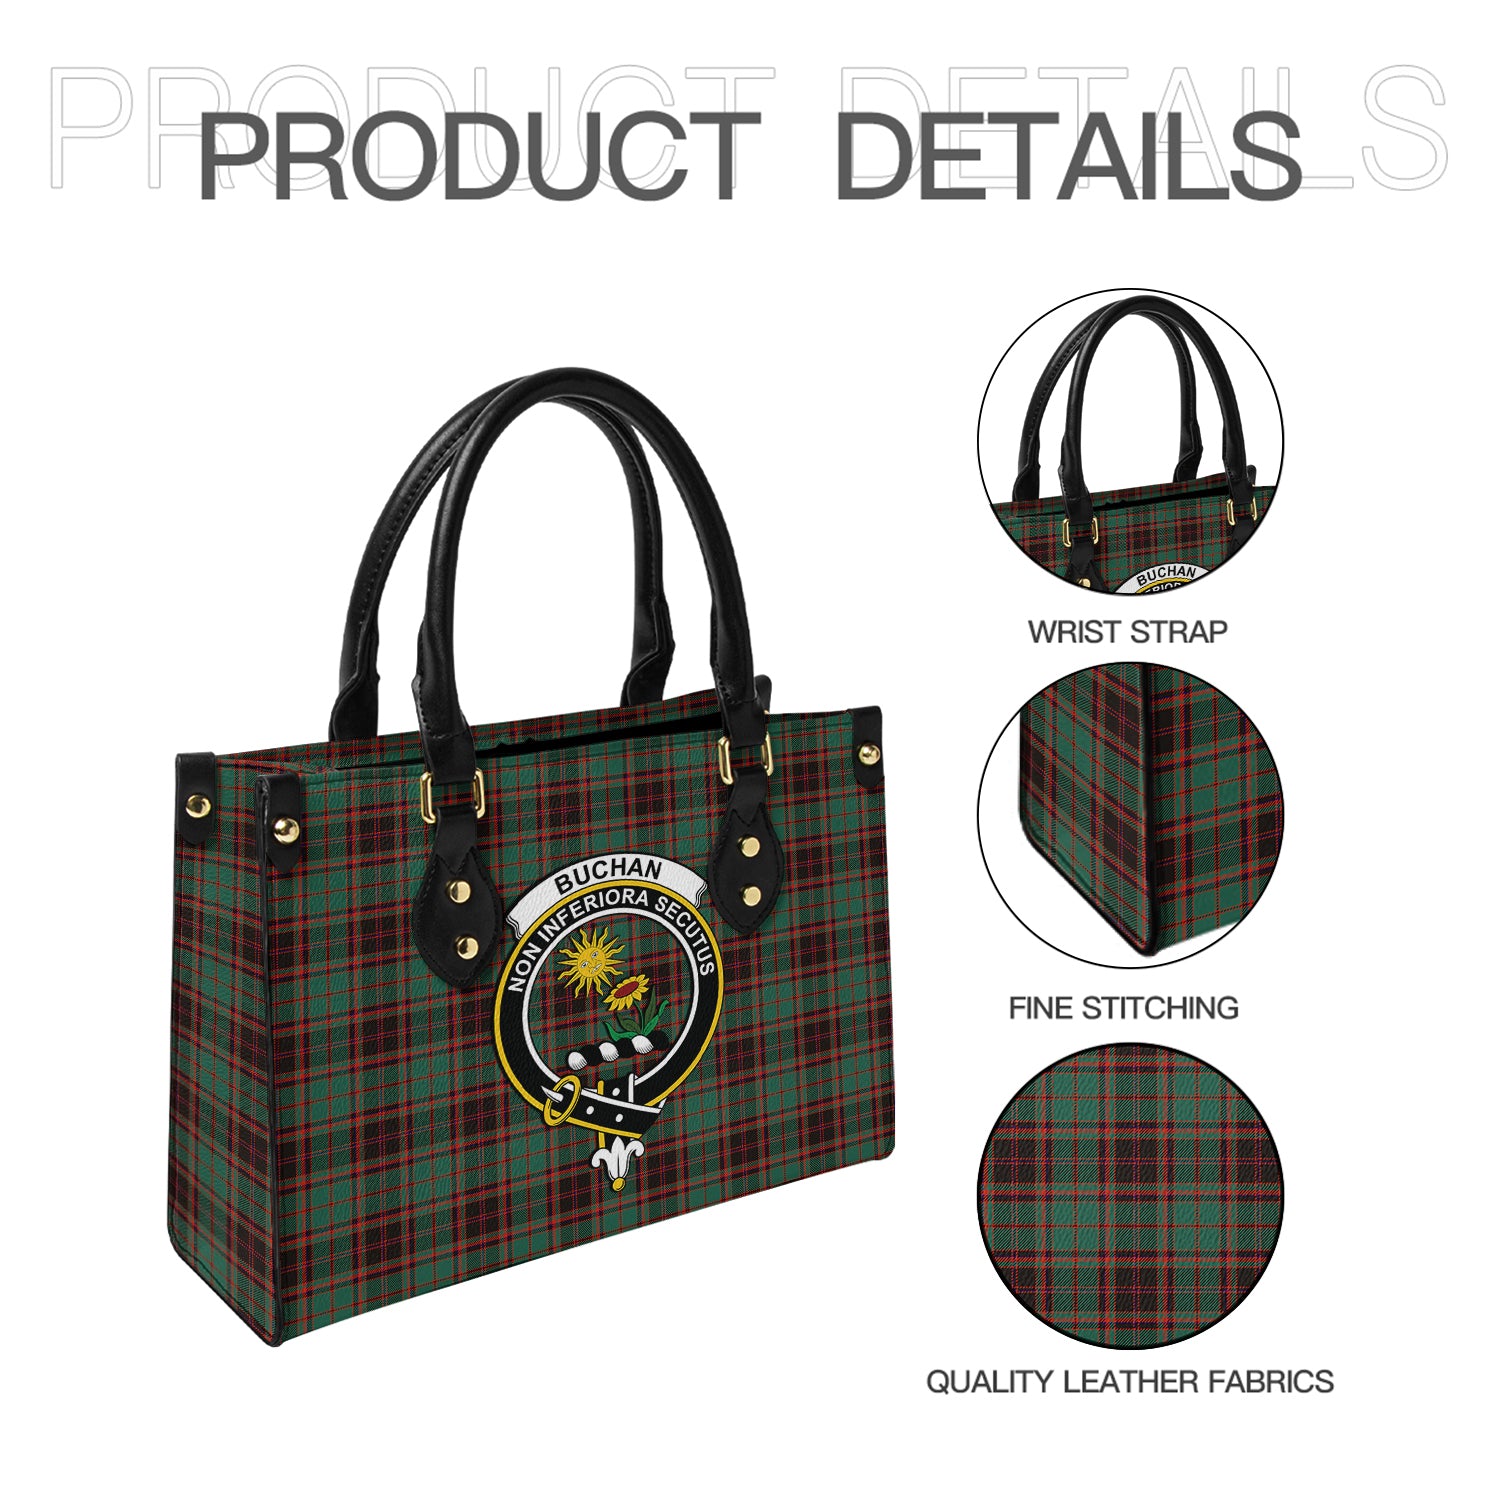 Buchan Ancient Tartan Leather Bag with Family Crest - Tartanvibesclothing